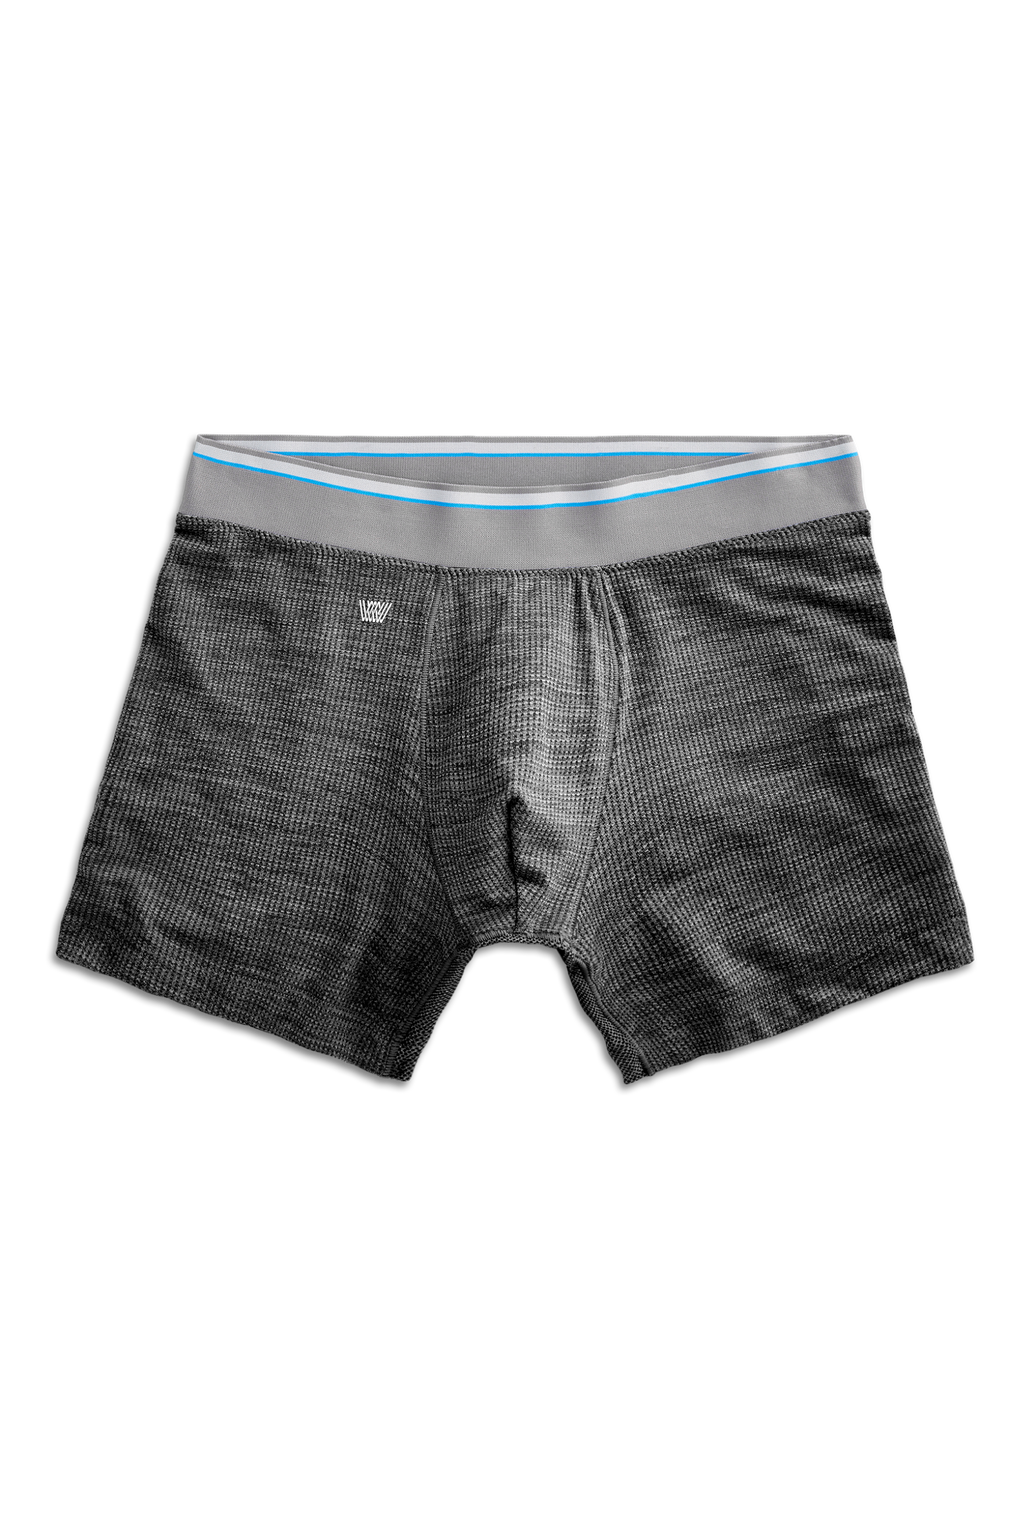 AIRKNITˣ Boxer Brief Charcoal Heather